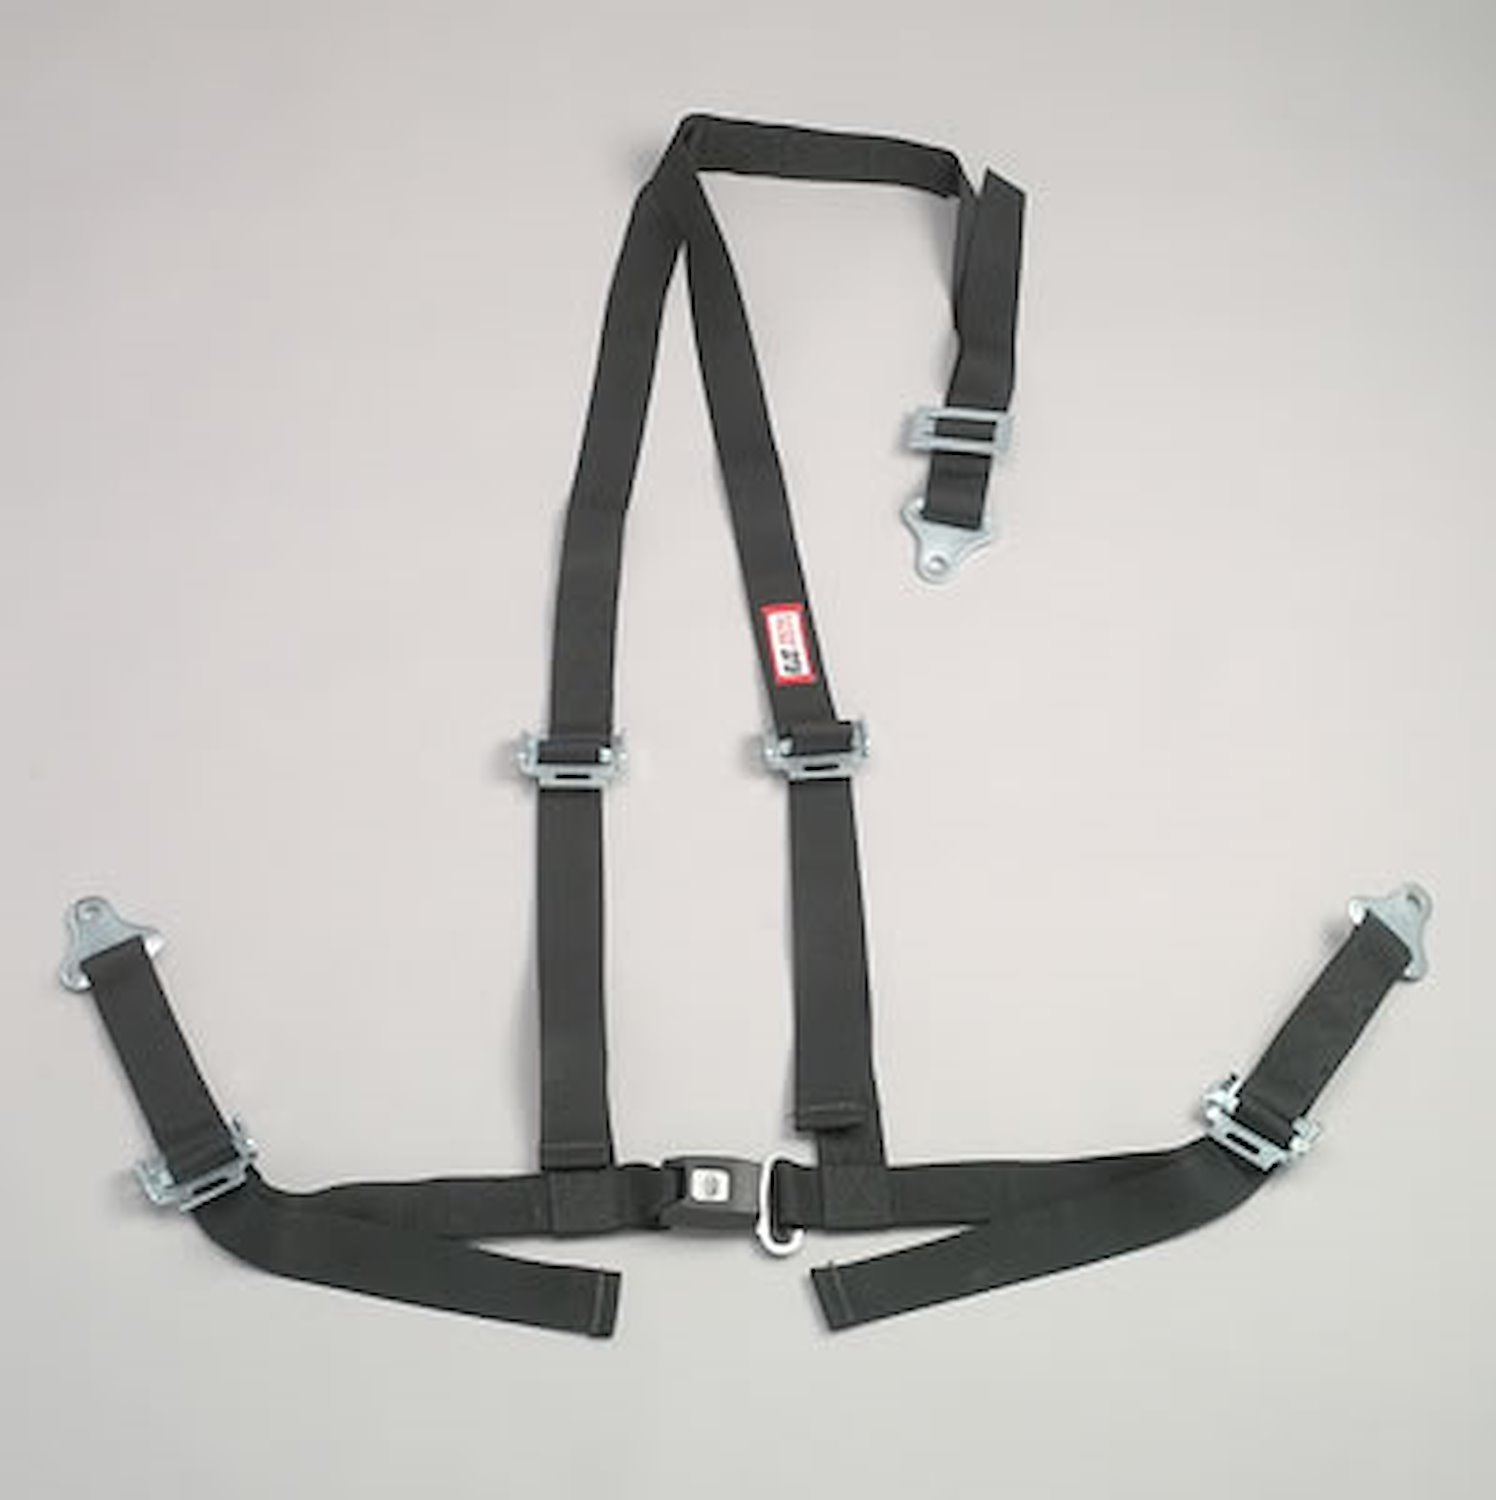 NON-SFI B&T HARNESS 2 PULL DOWN Lap Belt 2 S. H. V ROLL BAR Mount ALL BOLT ENDS w/STERNUM STRAP YELLOW